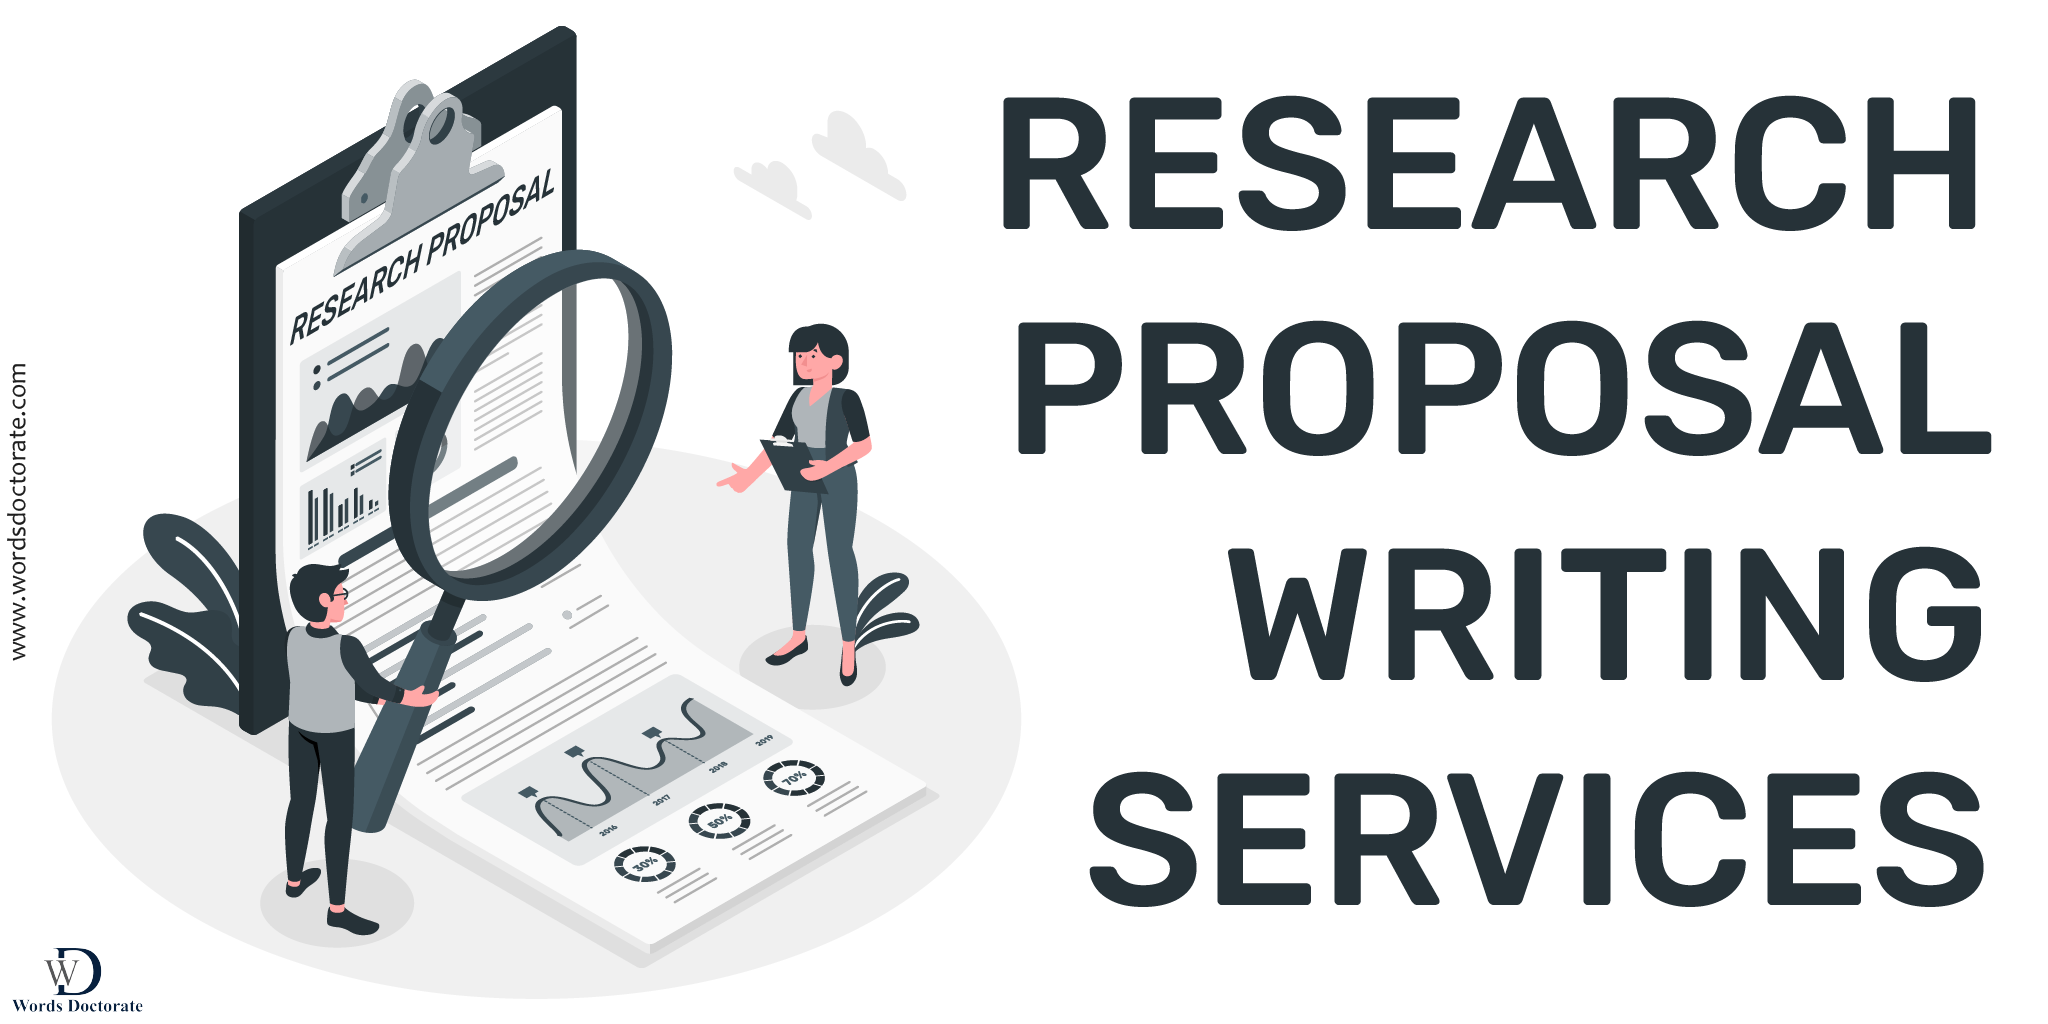 Research Proposal Writing Services